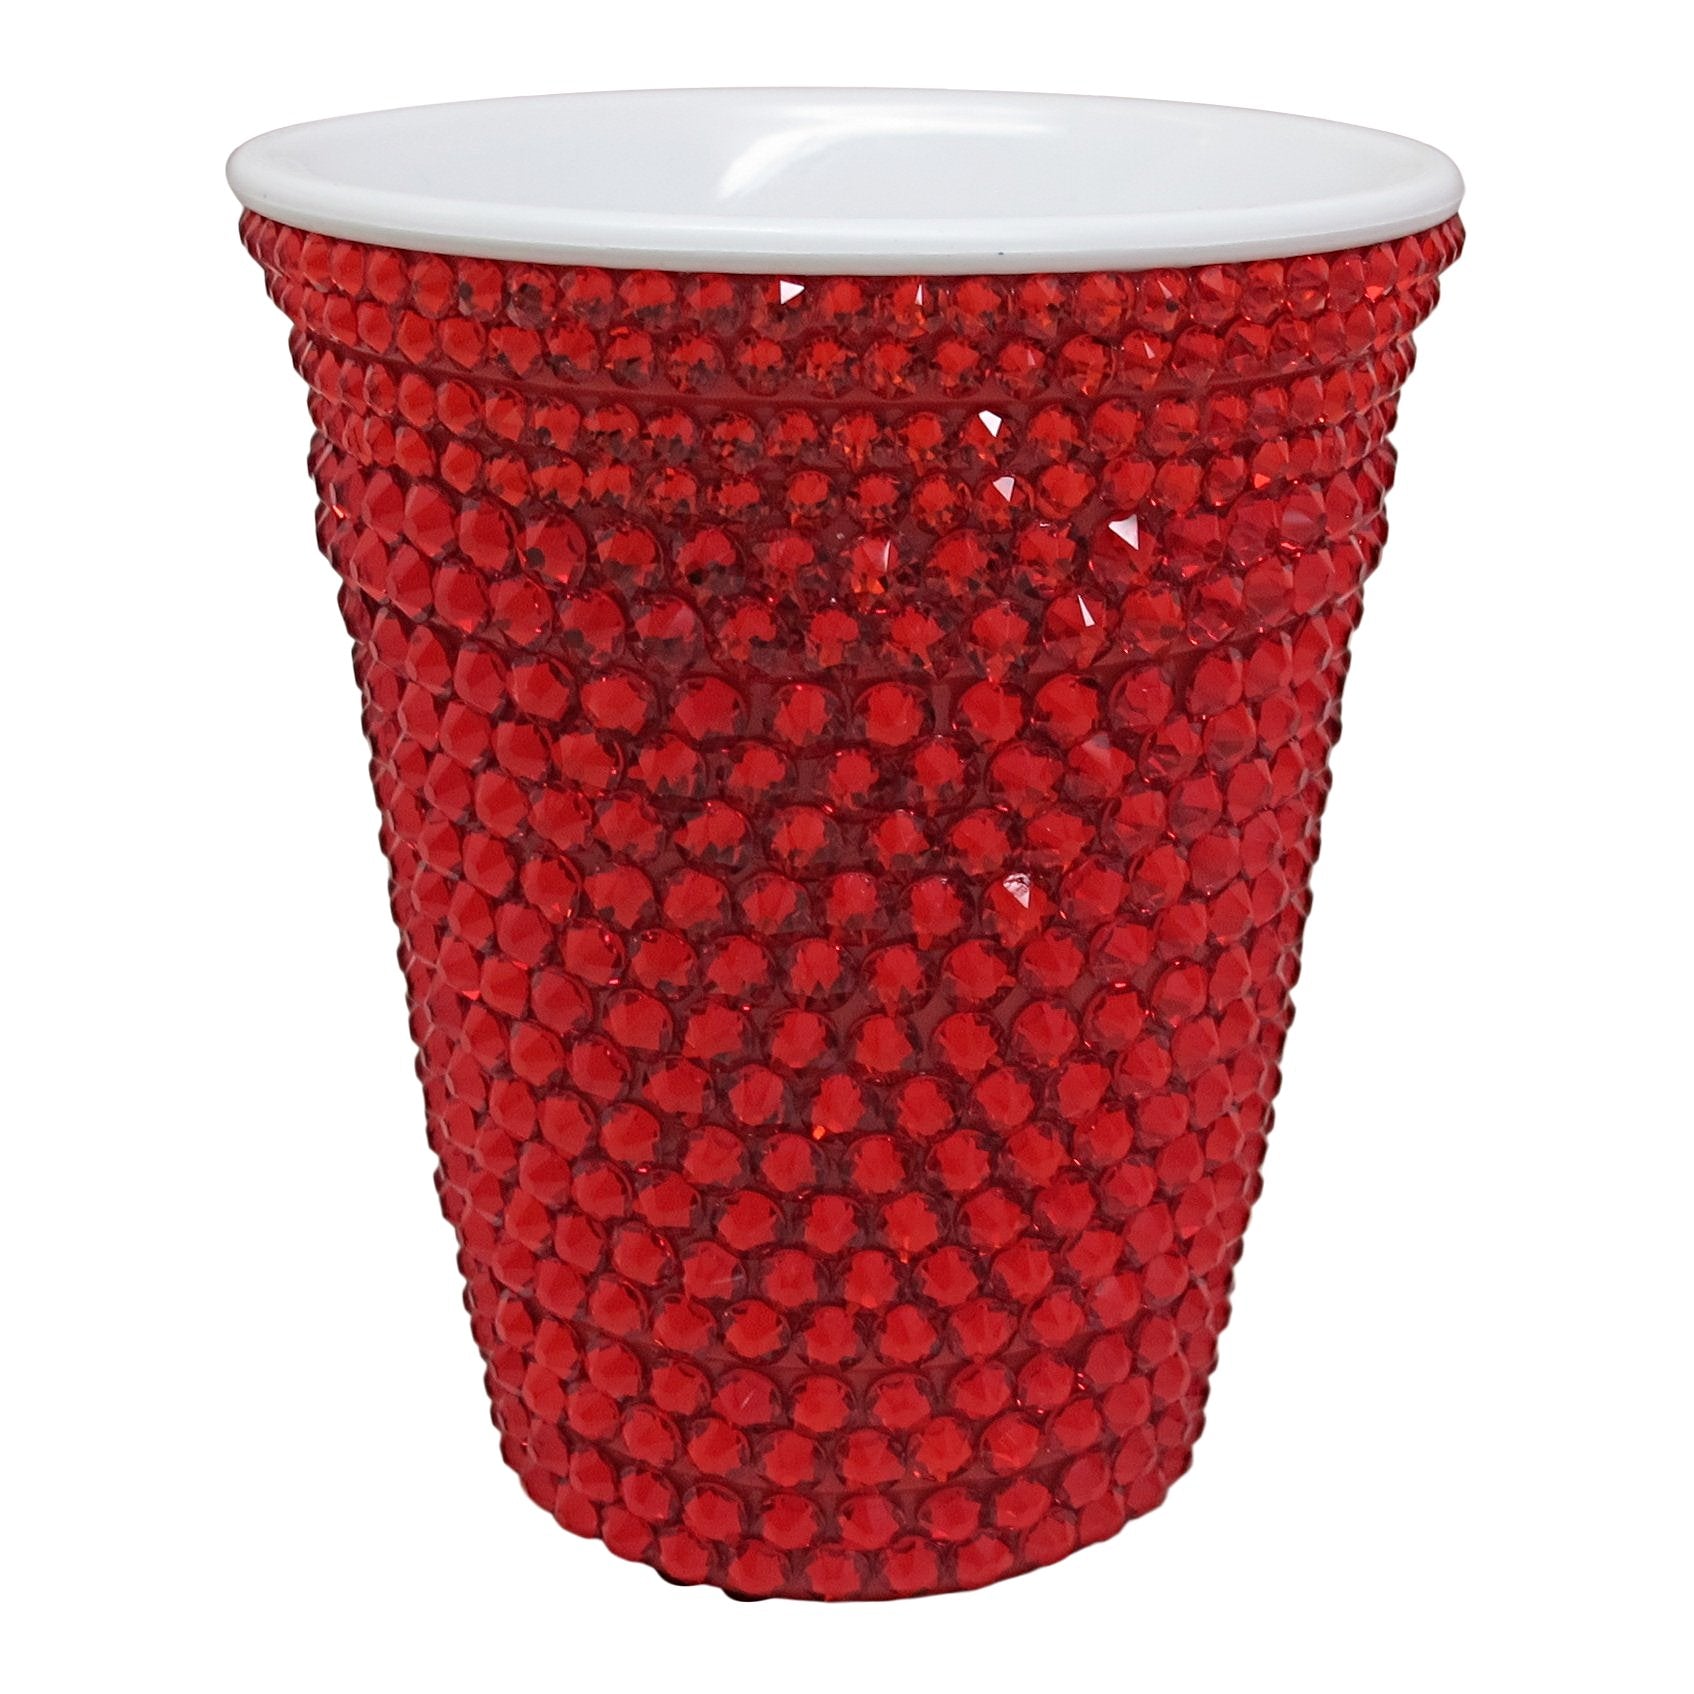 Crystal Solo Cup